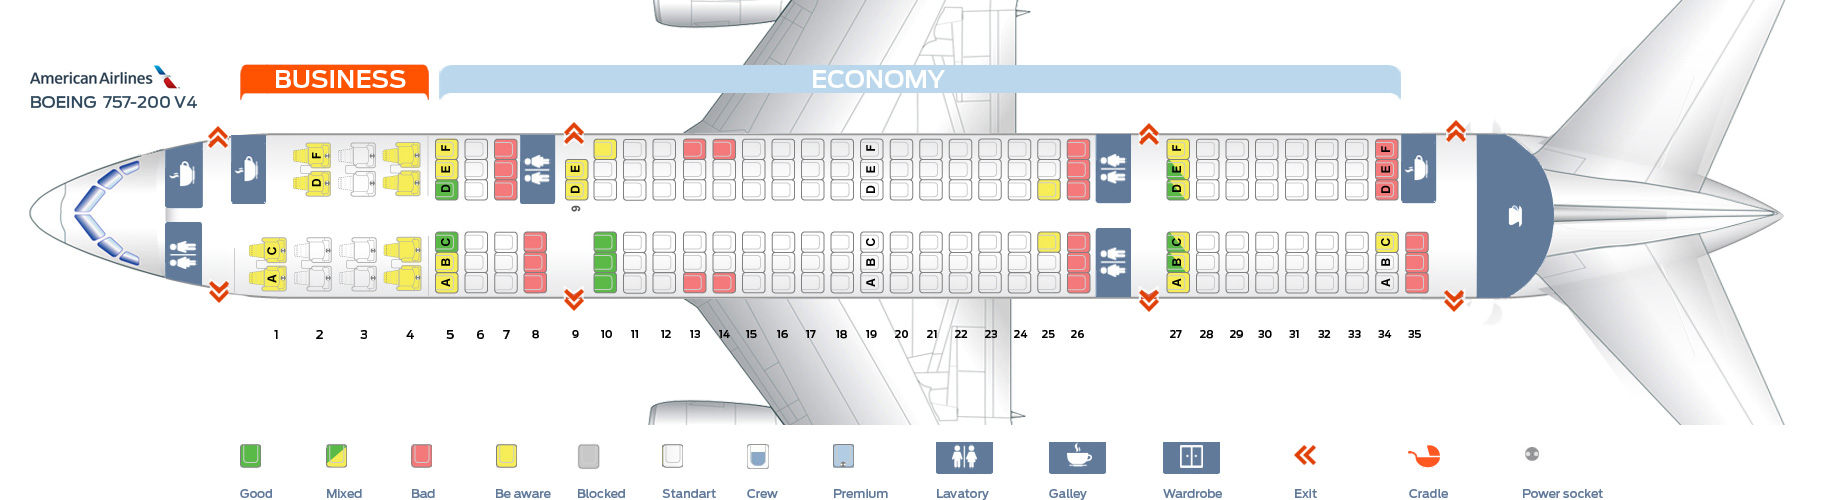 Seat map Boeing 757200 American Airlines. Best seats in